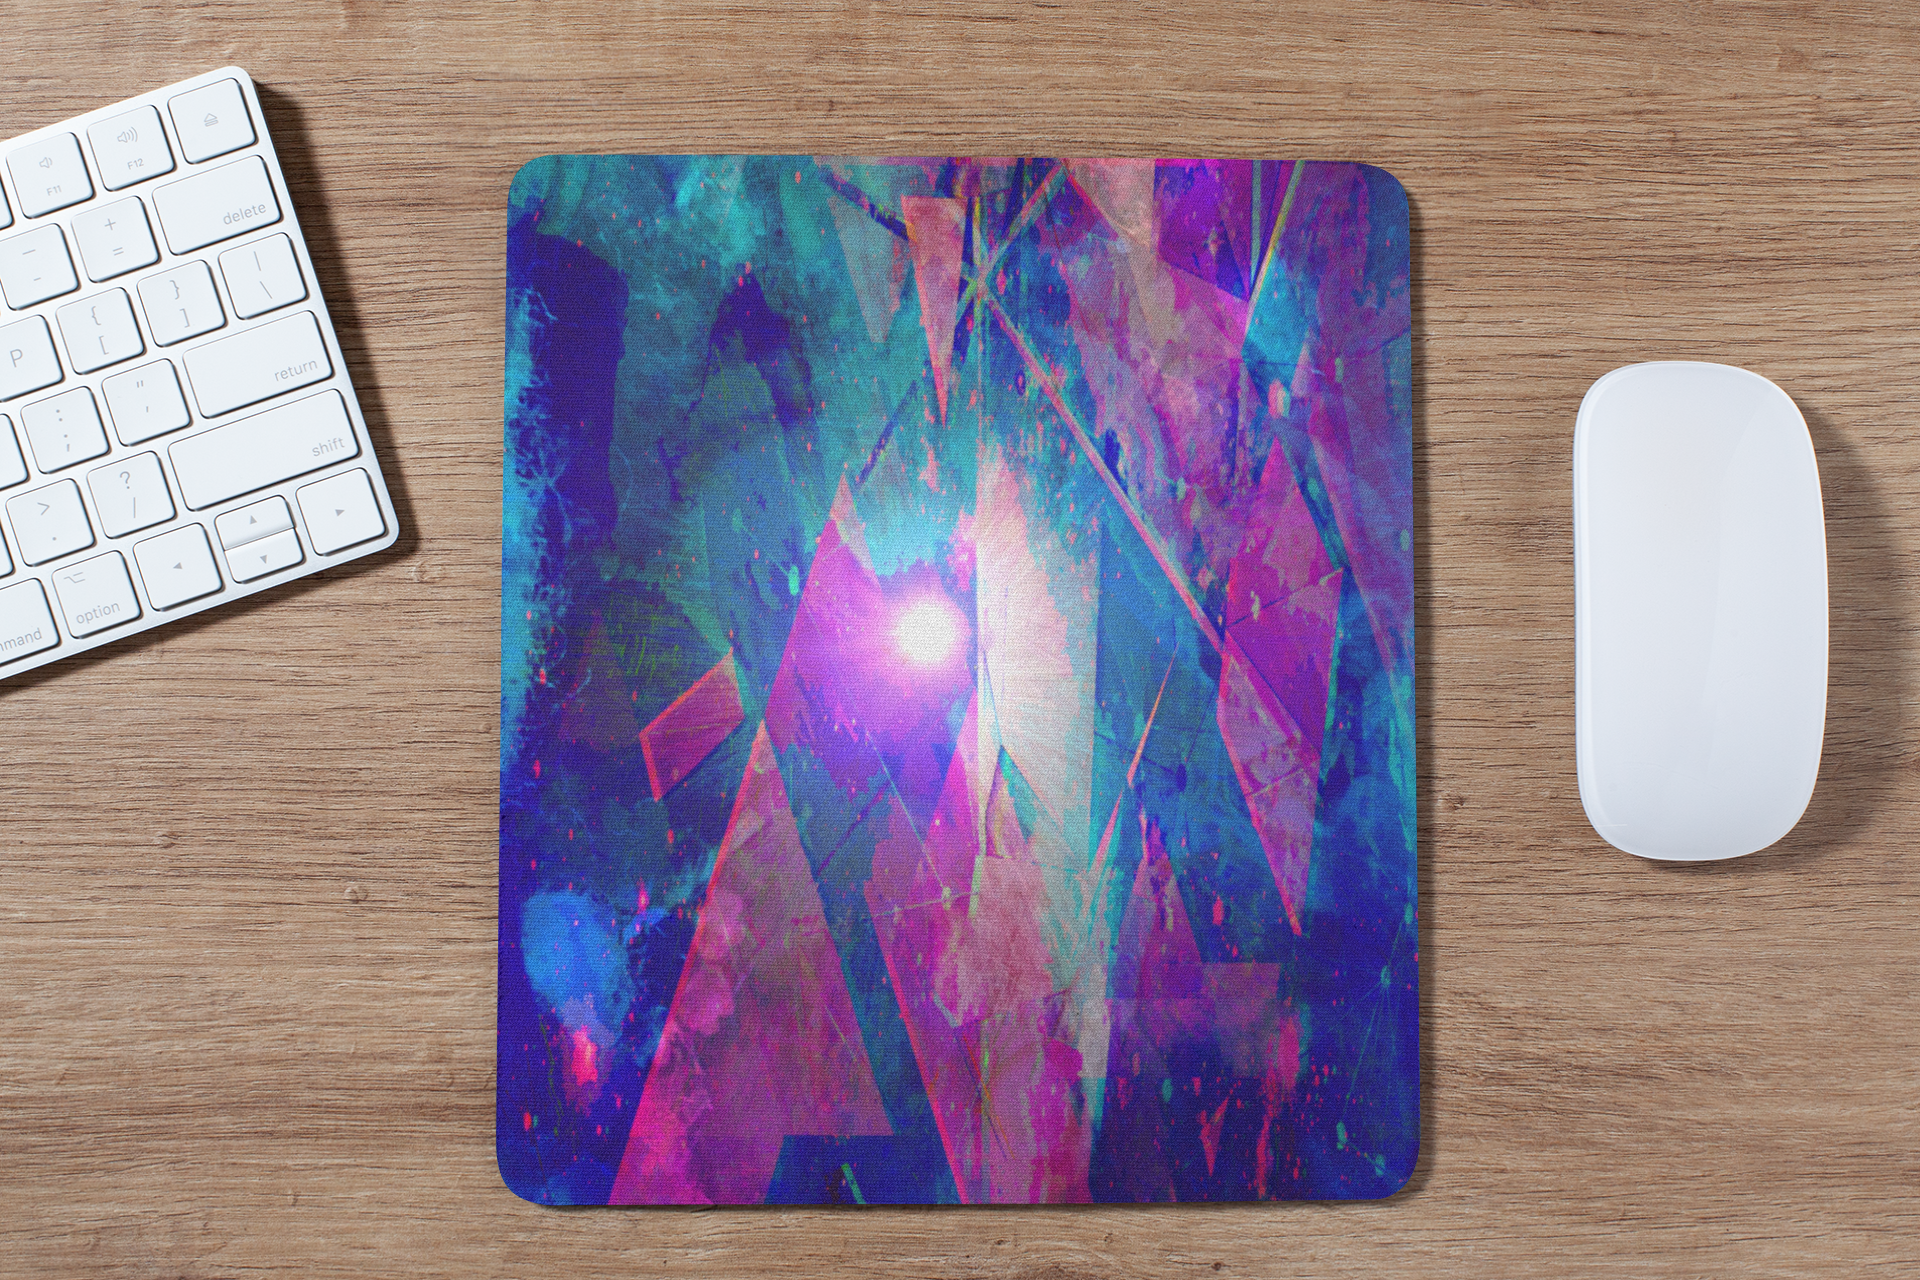 Moonlight in Abstraction - Mouse Pad - Lisa Dailey Black Cat Art & Design